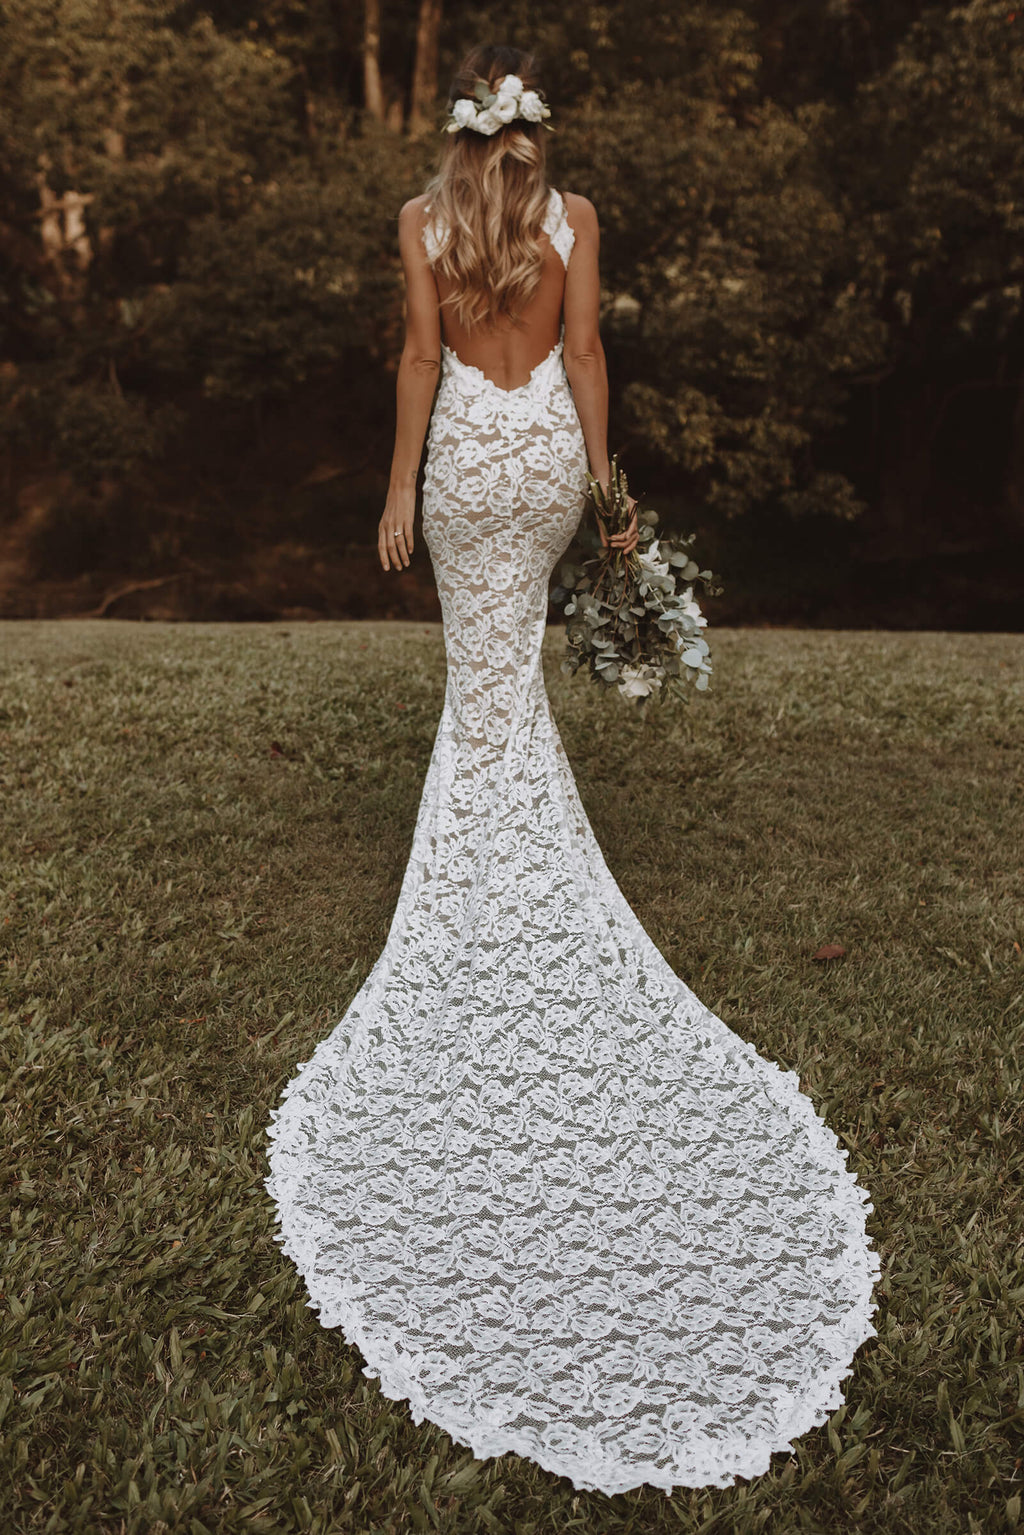 5 Showstopping Backless Wedding Dresses - Pretty Happy Love - Wedding Blog